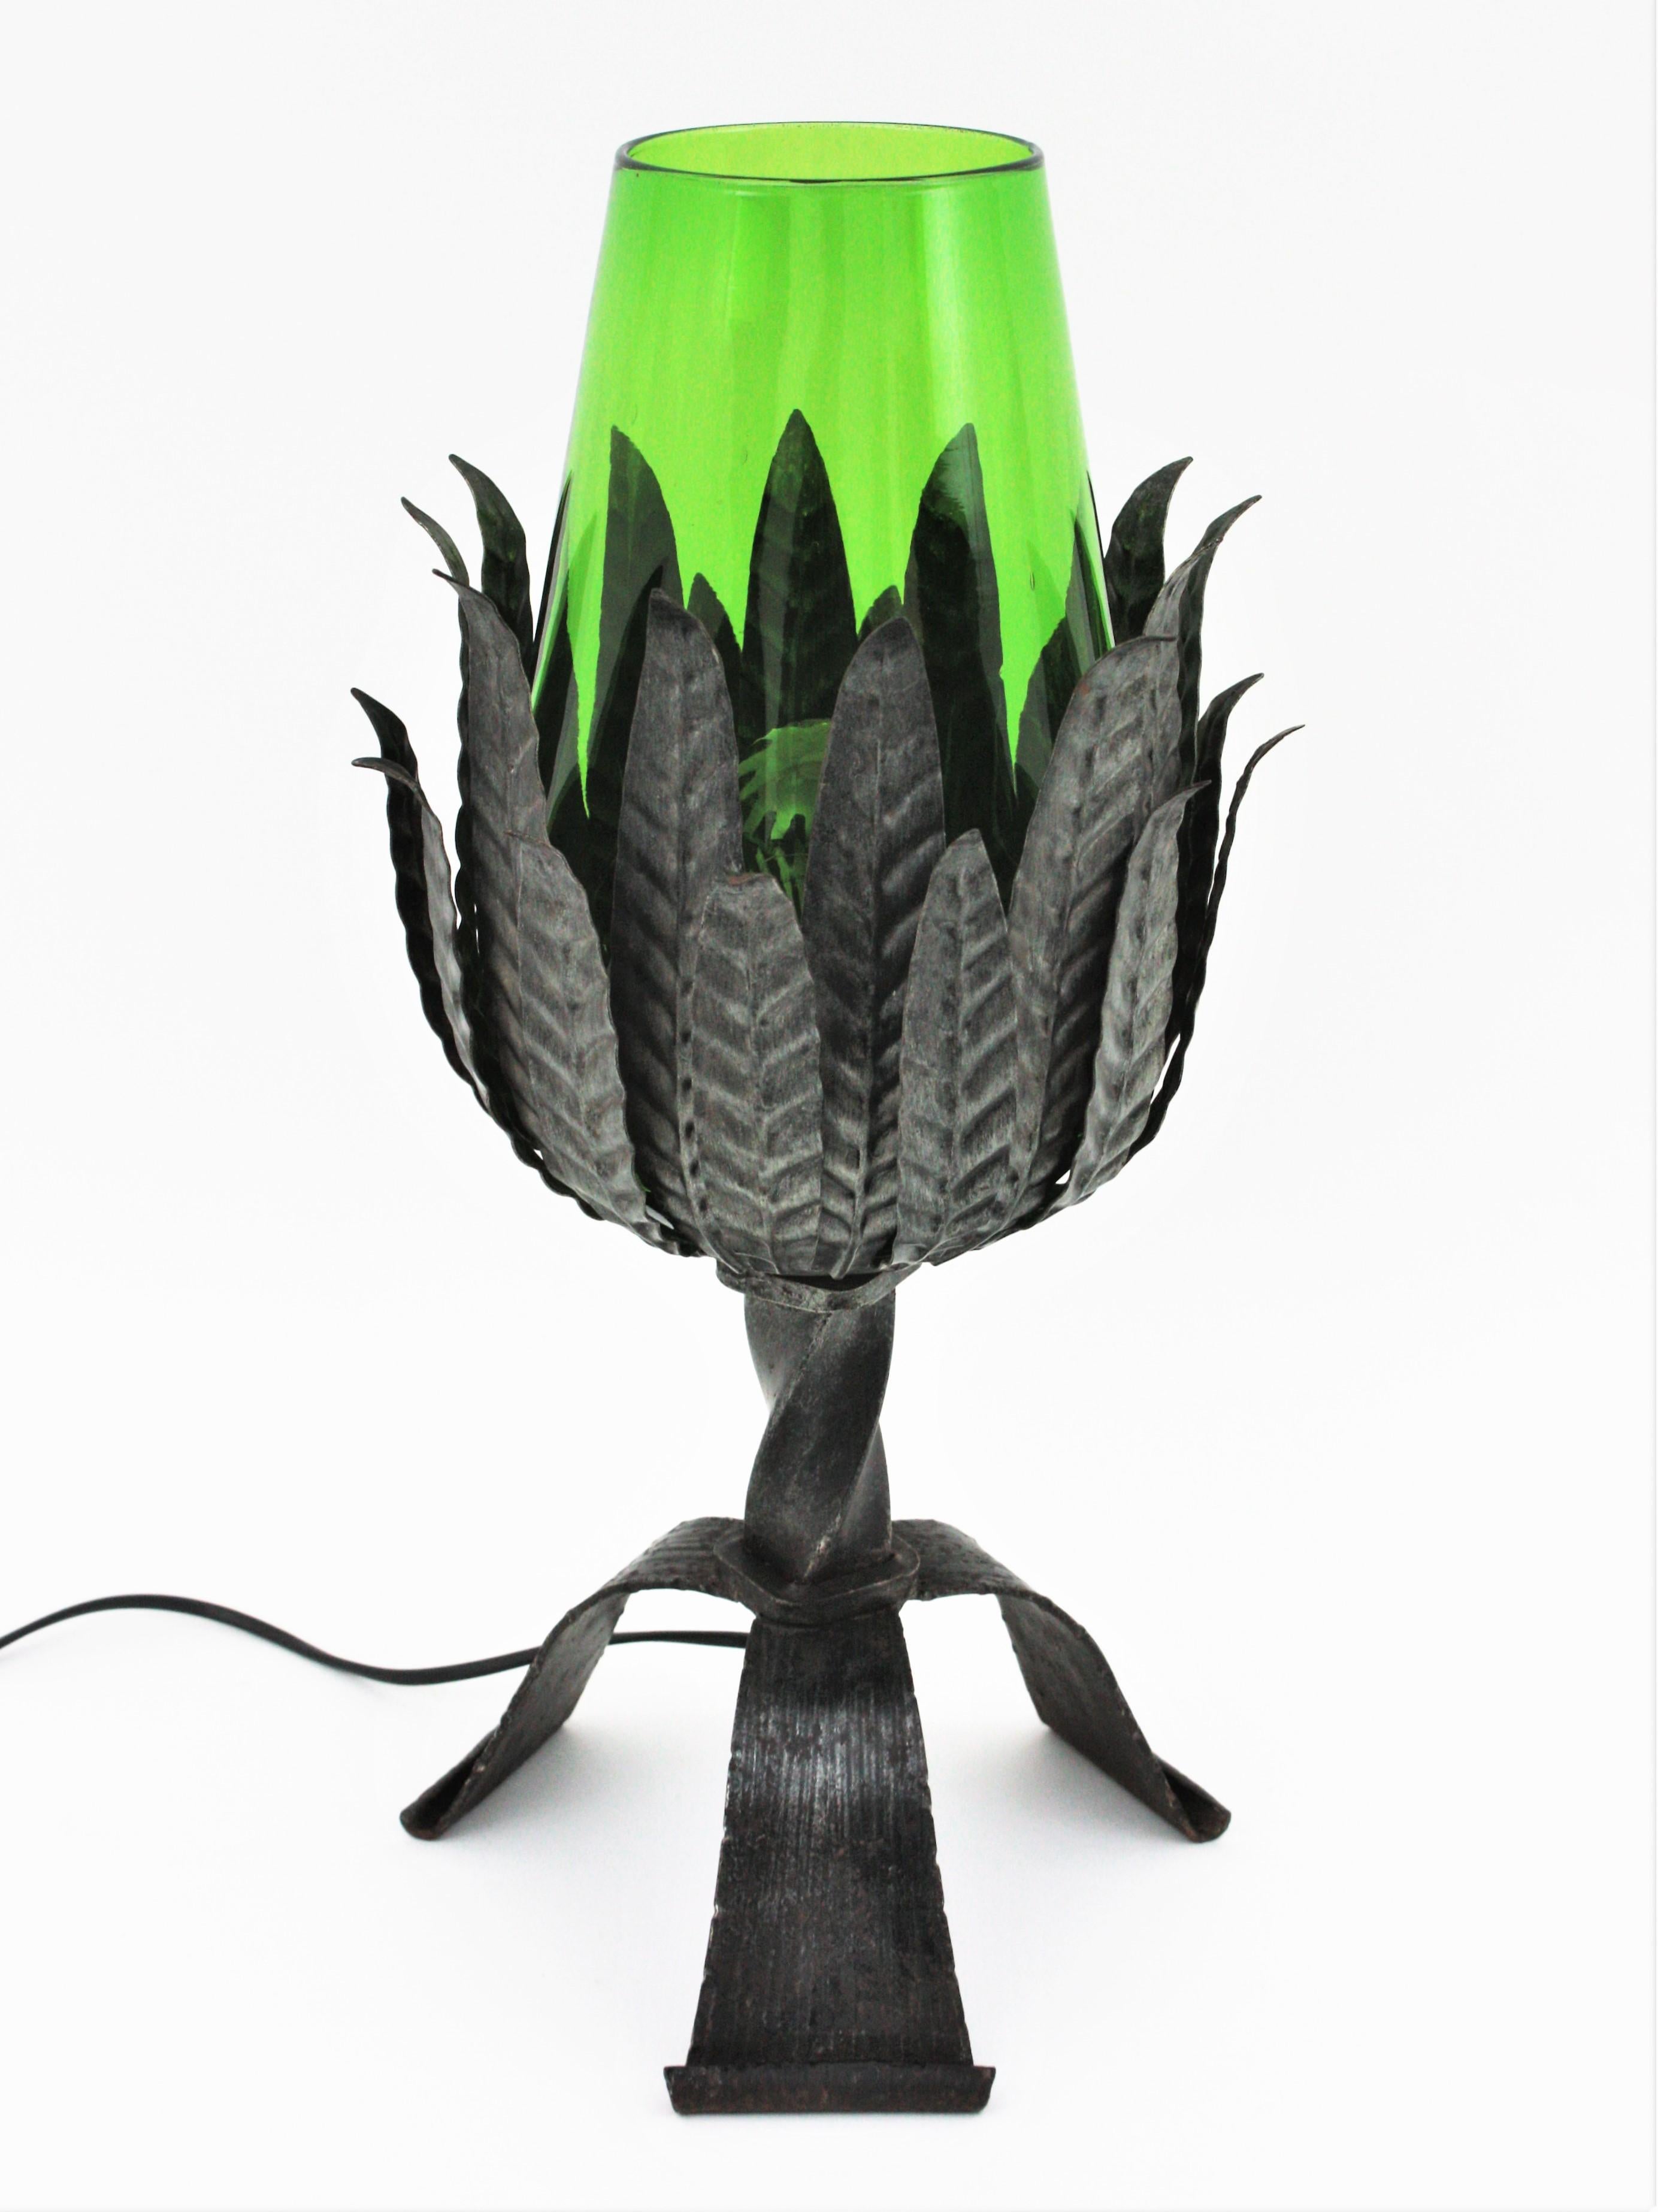 Spanish Table Lamp, Wrought Iron and Green Glass, 1950s For Sale 1